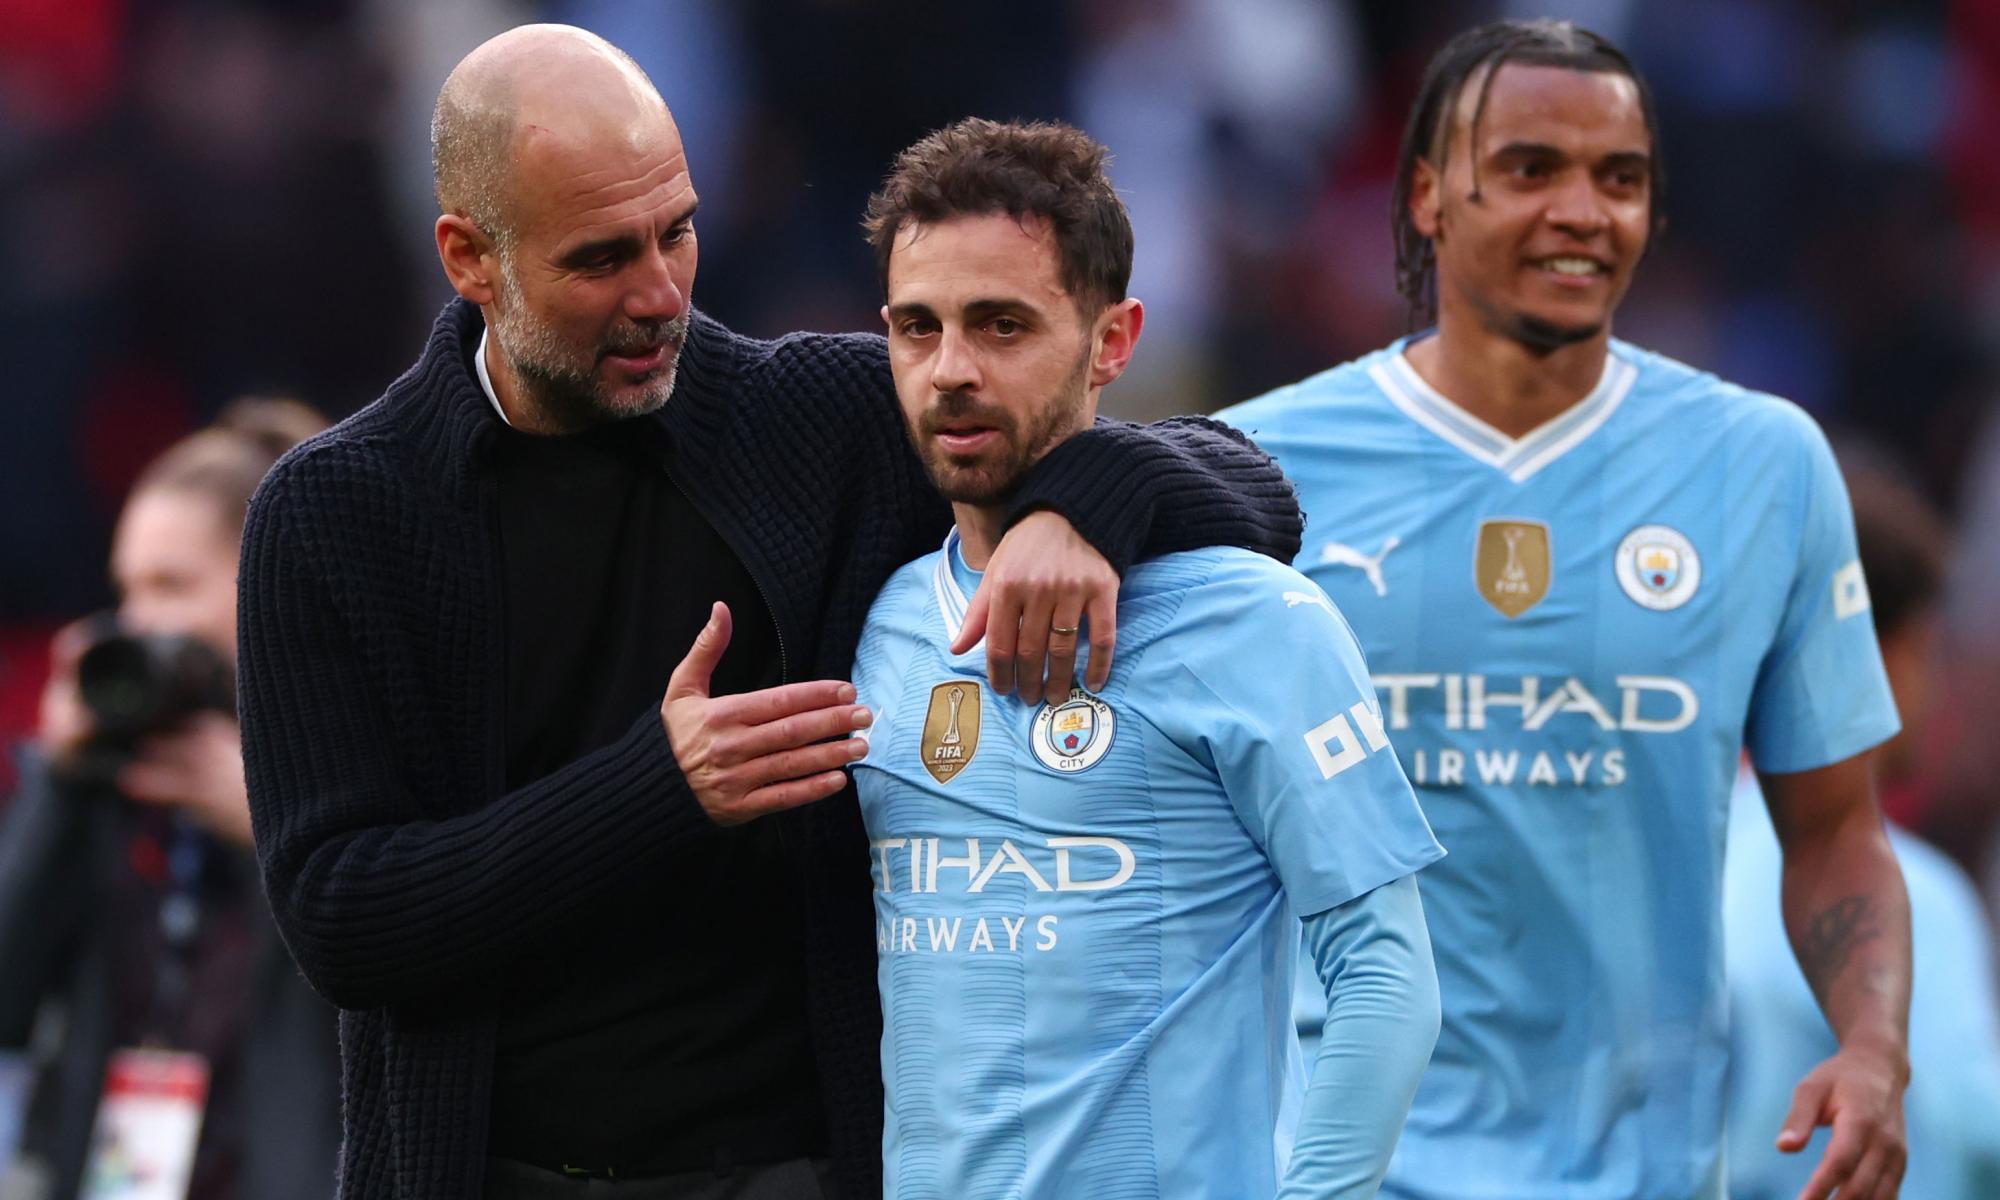 guardiola slams semi-final scheduling: “i don’t understand how we survived”